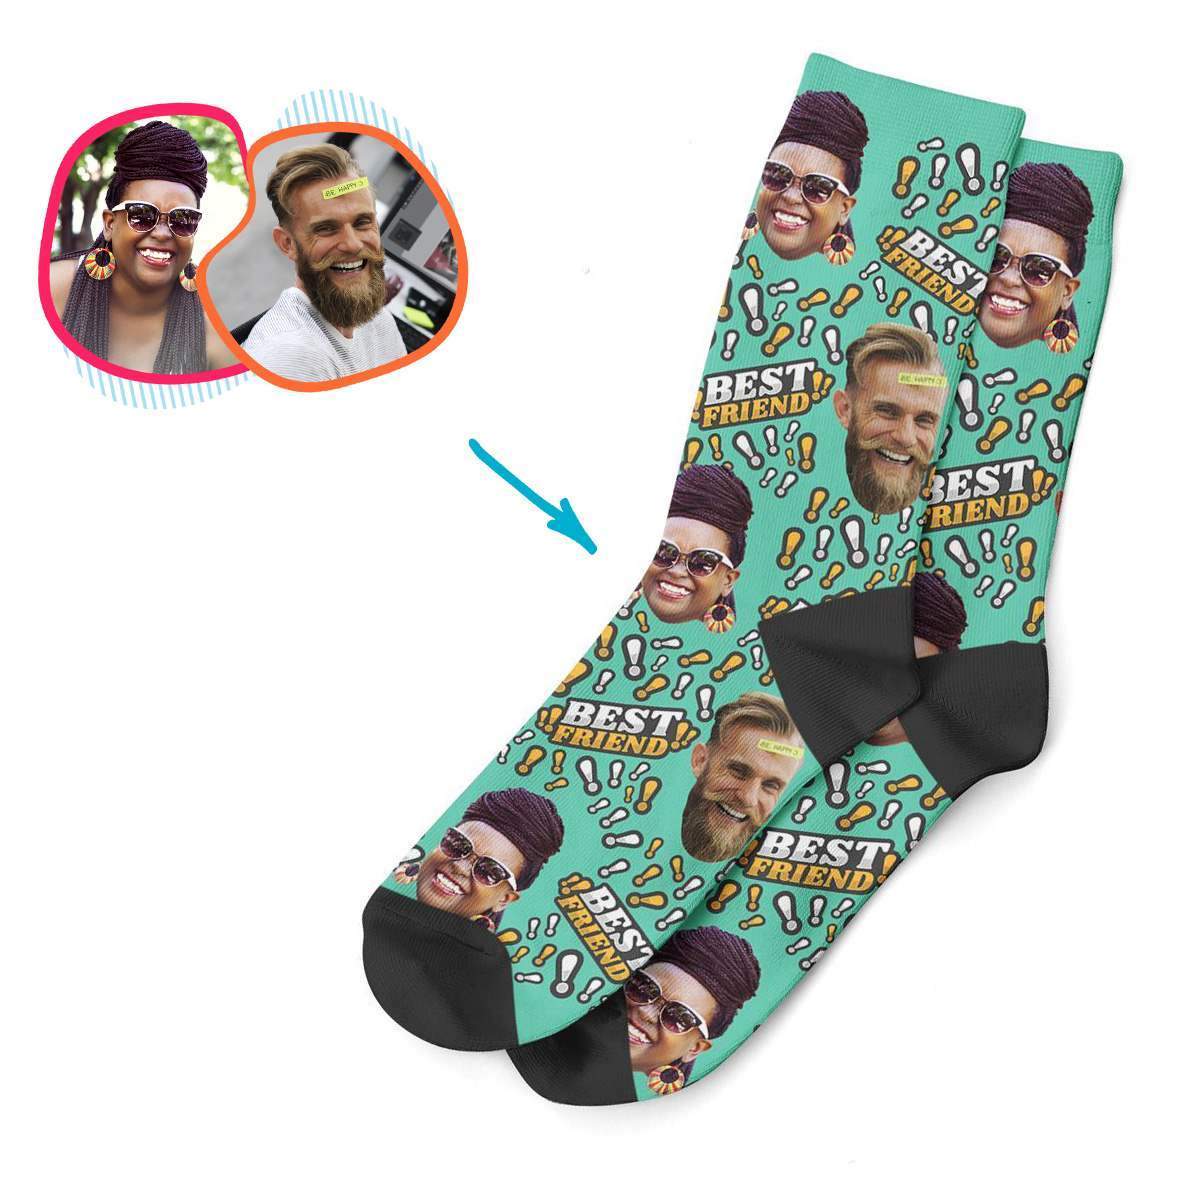 mint Best Friend socks personalized with photo of face printed on them